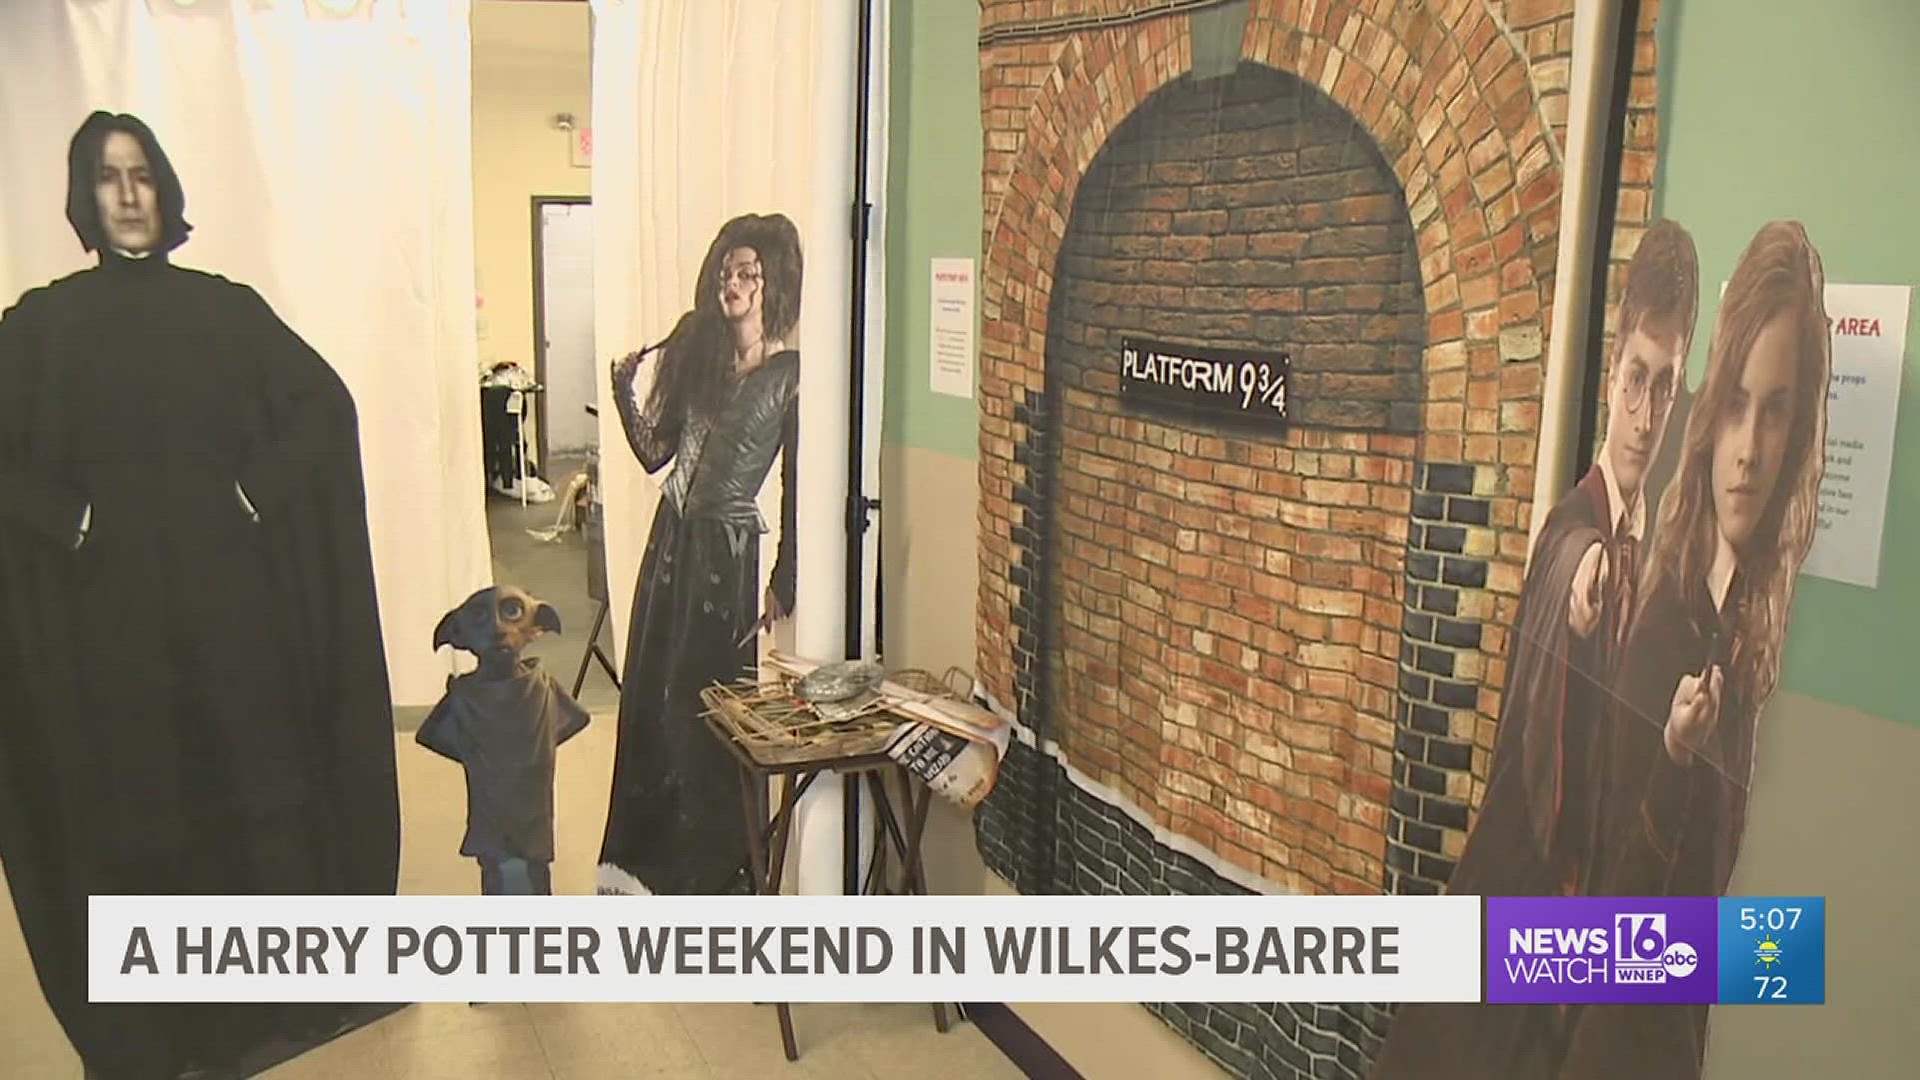 Get your wands ready! Lots of magical fun is planned for downtown Wilkes-Barre this weekend.